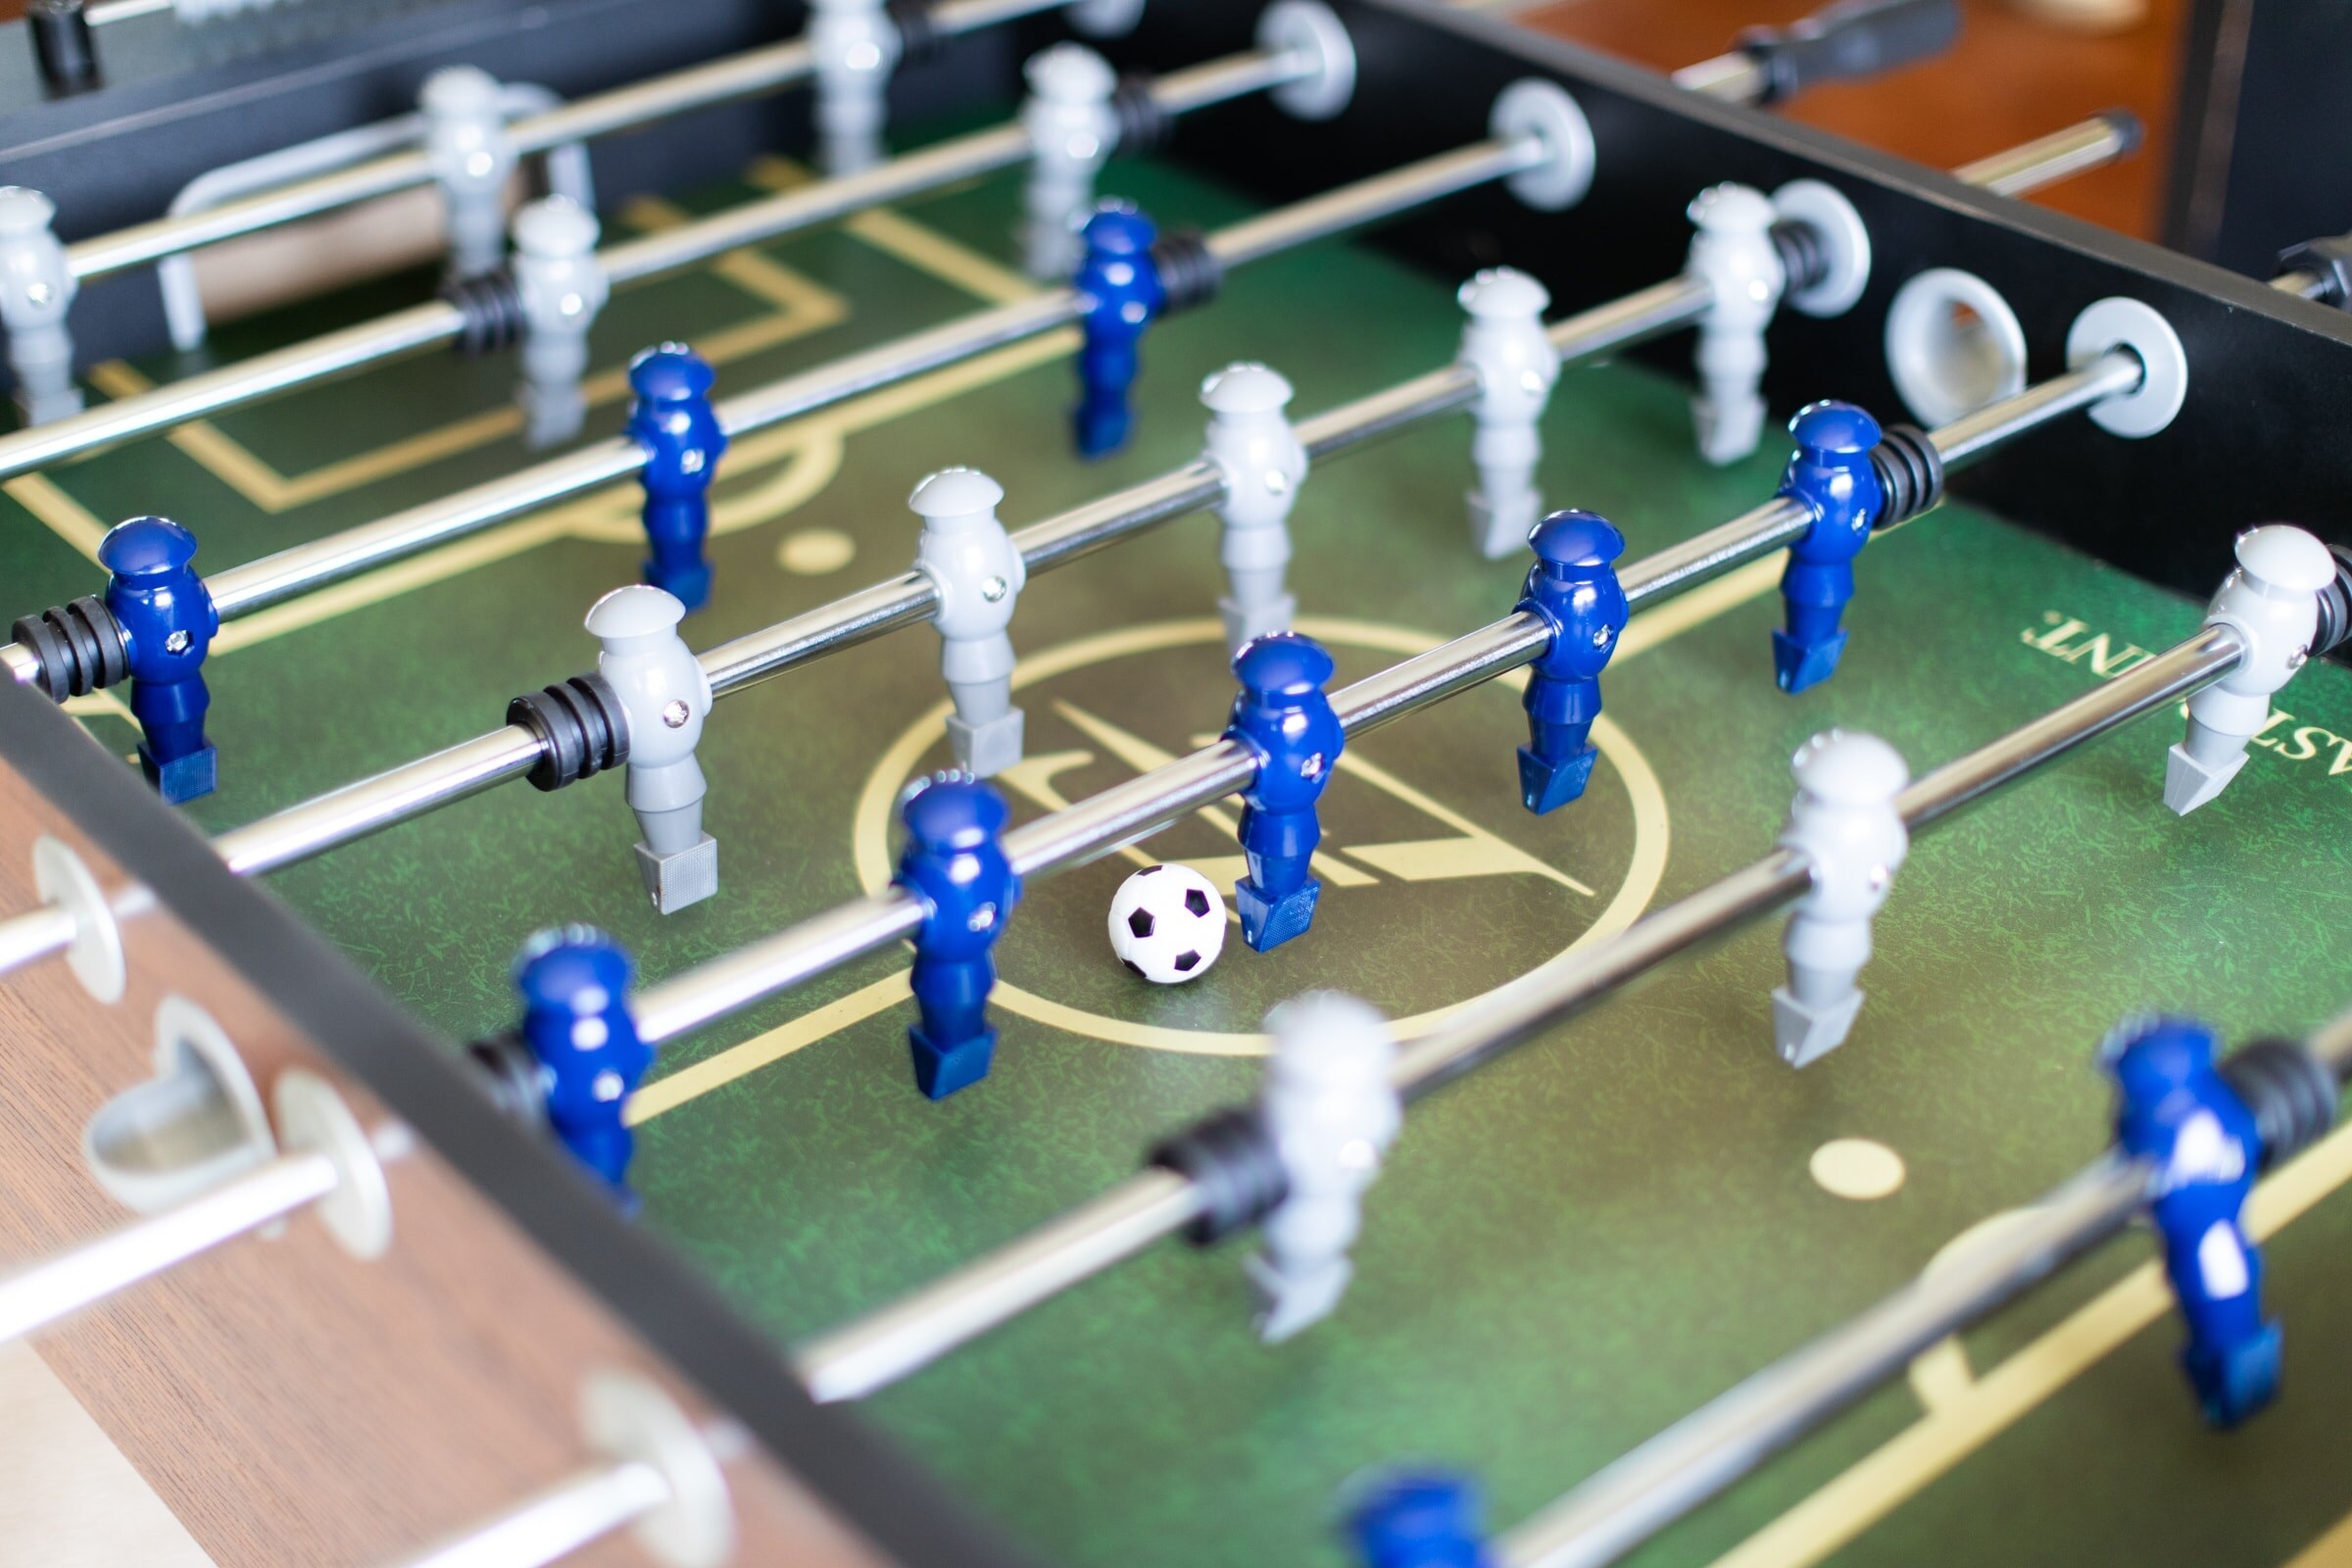 Score big in a round of foosball!